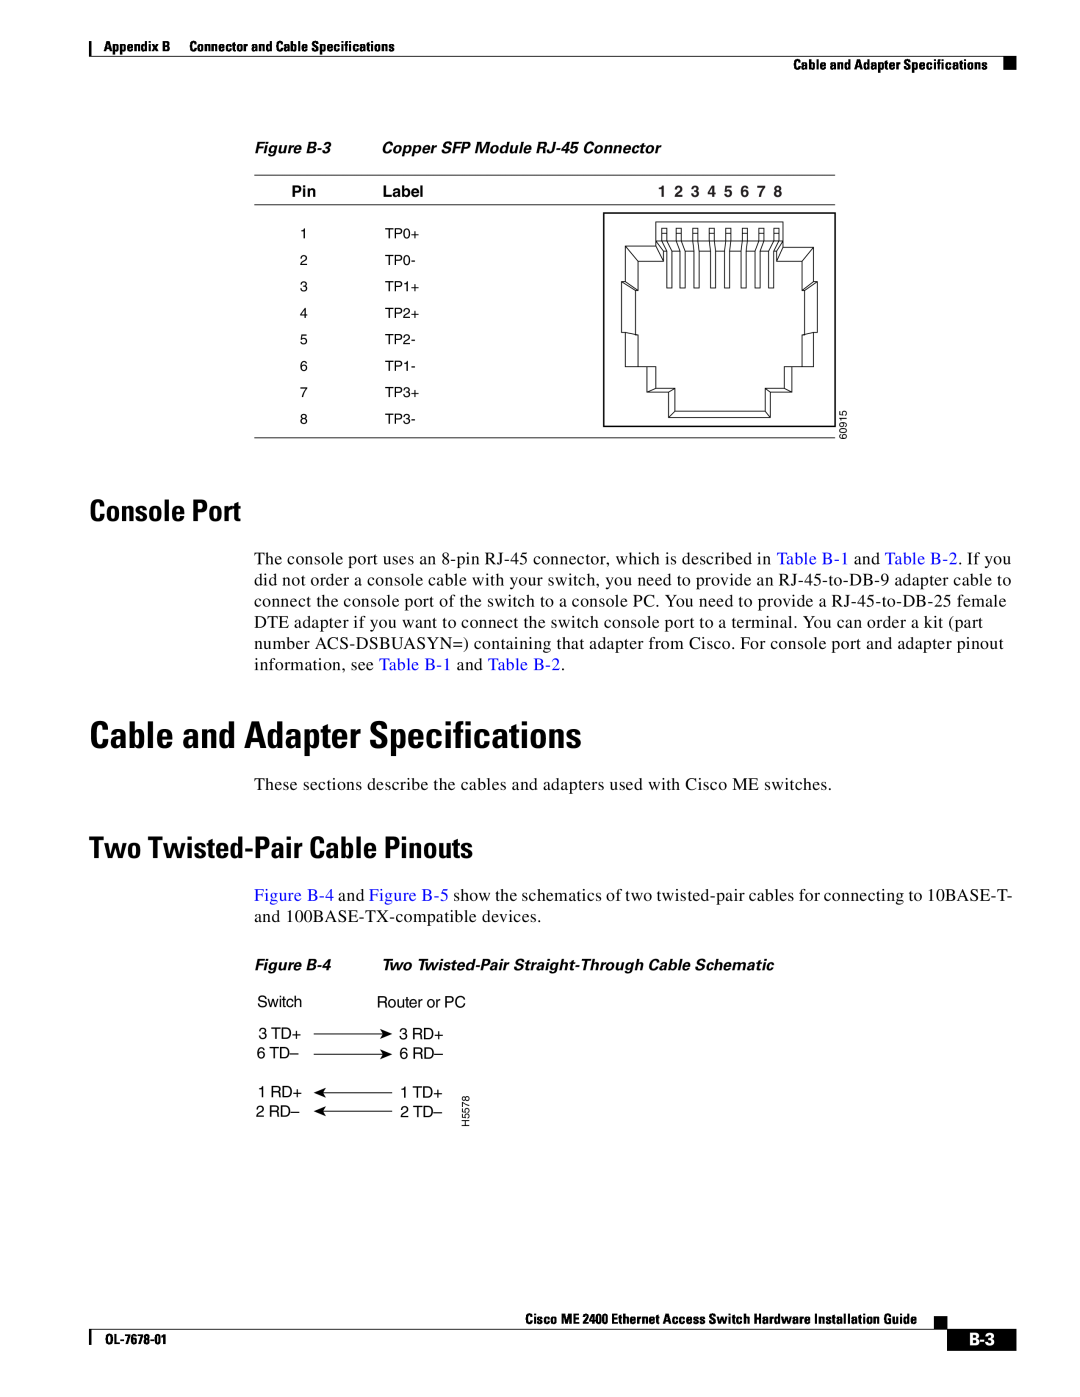 Cisco Systems ME 2400 manual Cable and Adapter Specifications, Two Twisted-Pair Cable Pinouts, Console Port 